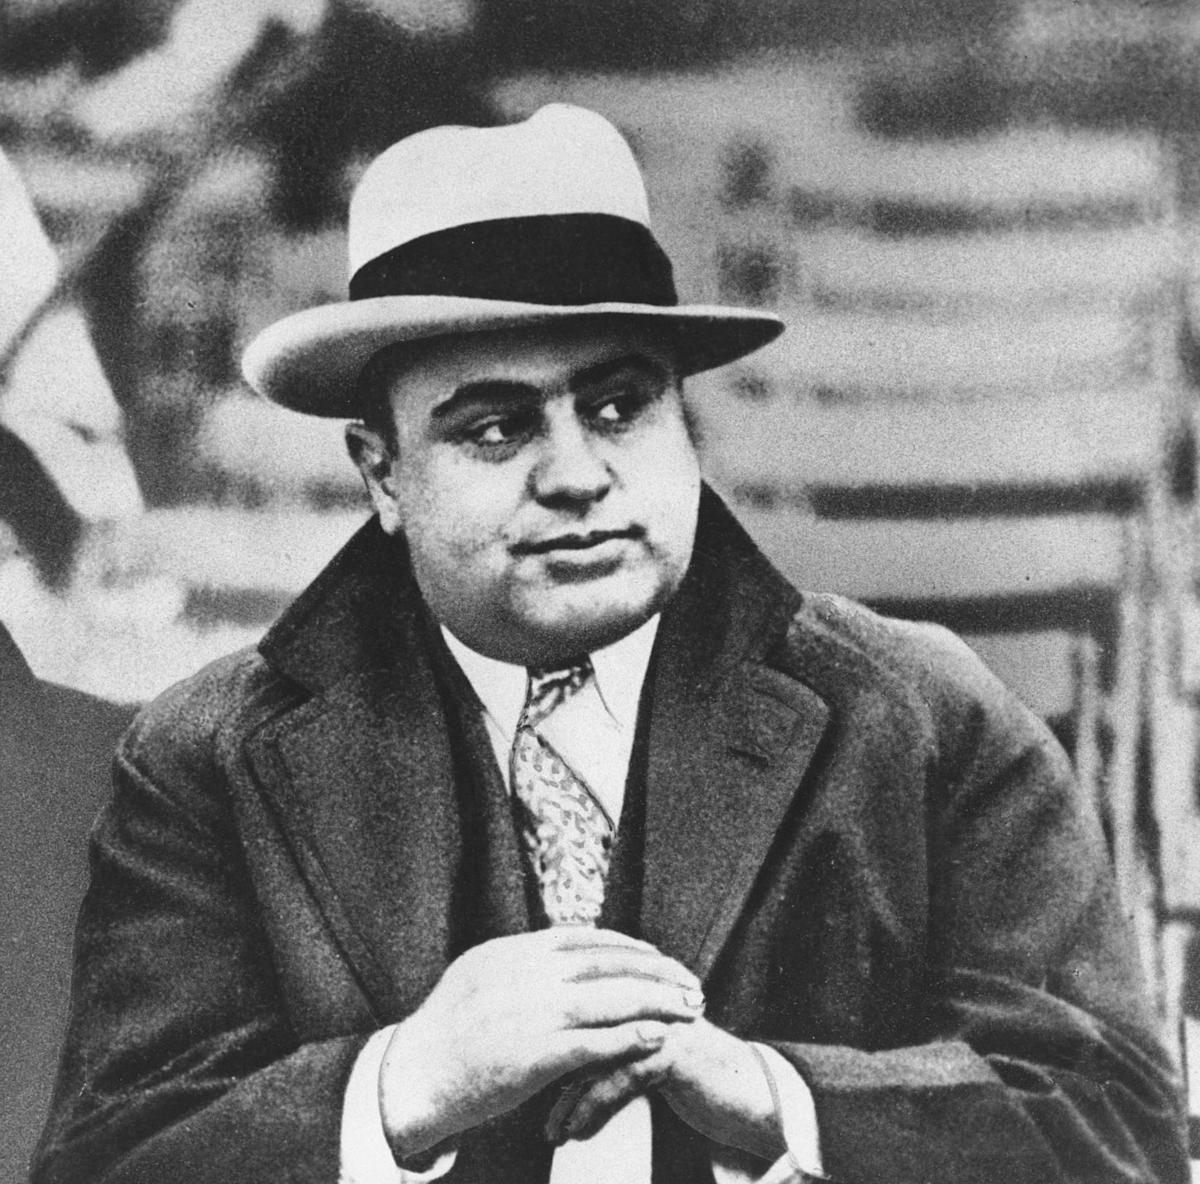 Famous Gangster Logo - Chicago is known for Capone, but Illinois gangsters had much wider